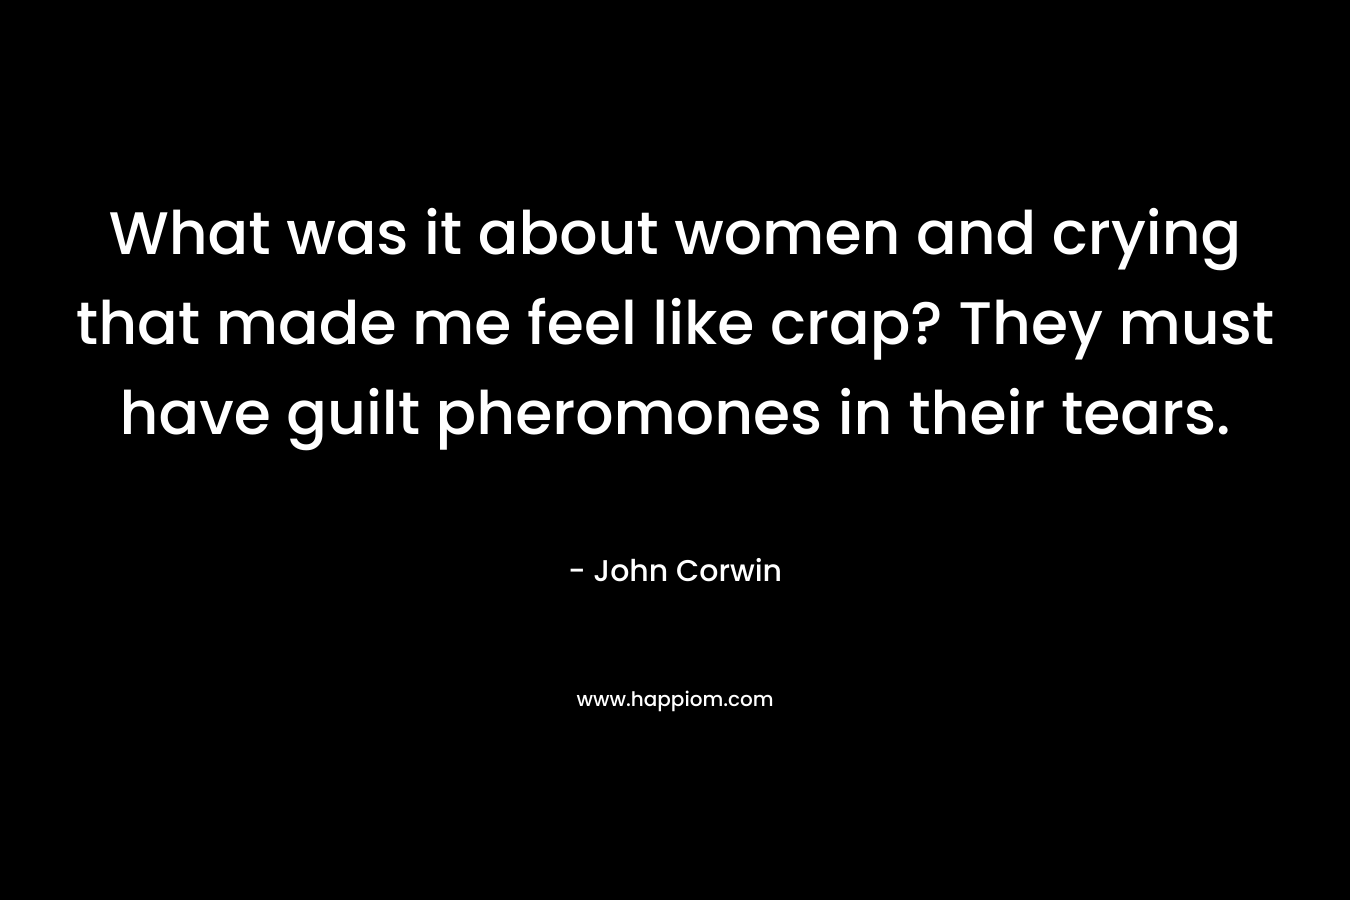 What was it about women and crying that made me feel like crap? They must have guilt pheromones in their tears. – John Corwin